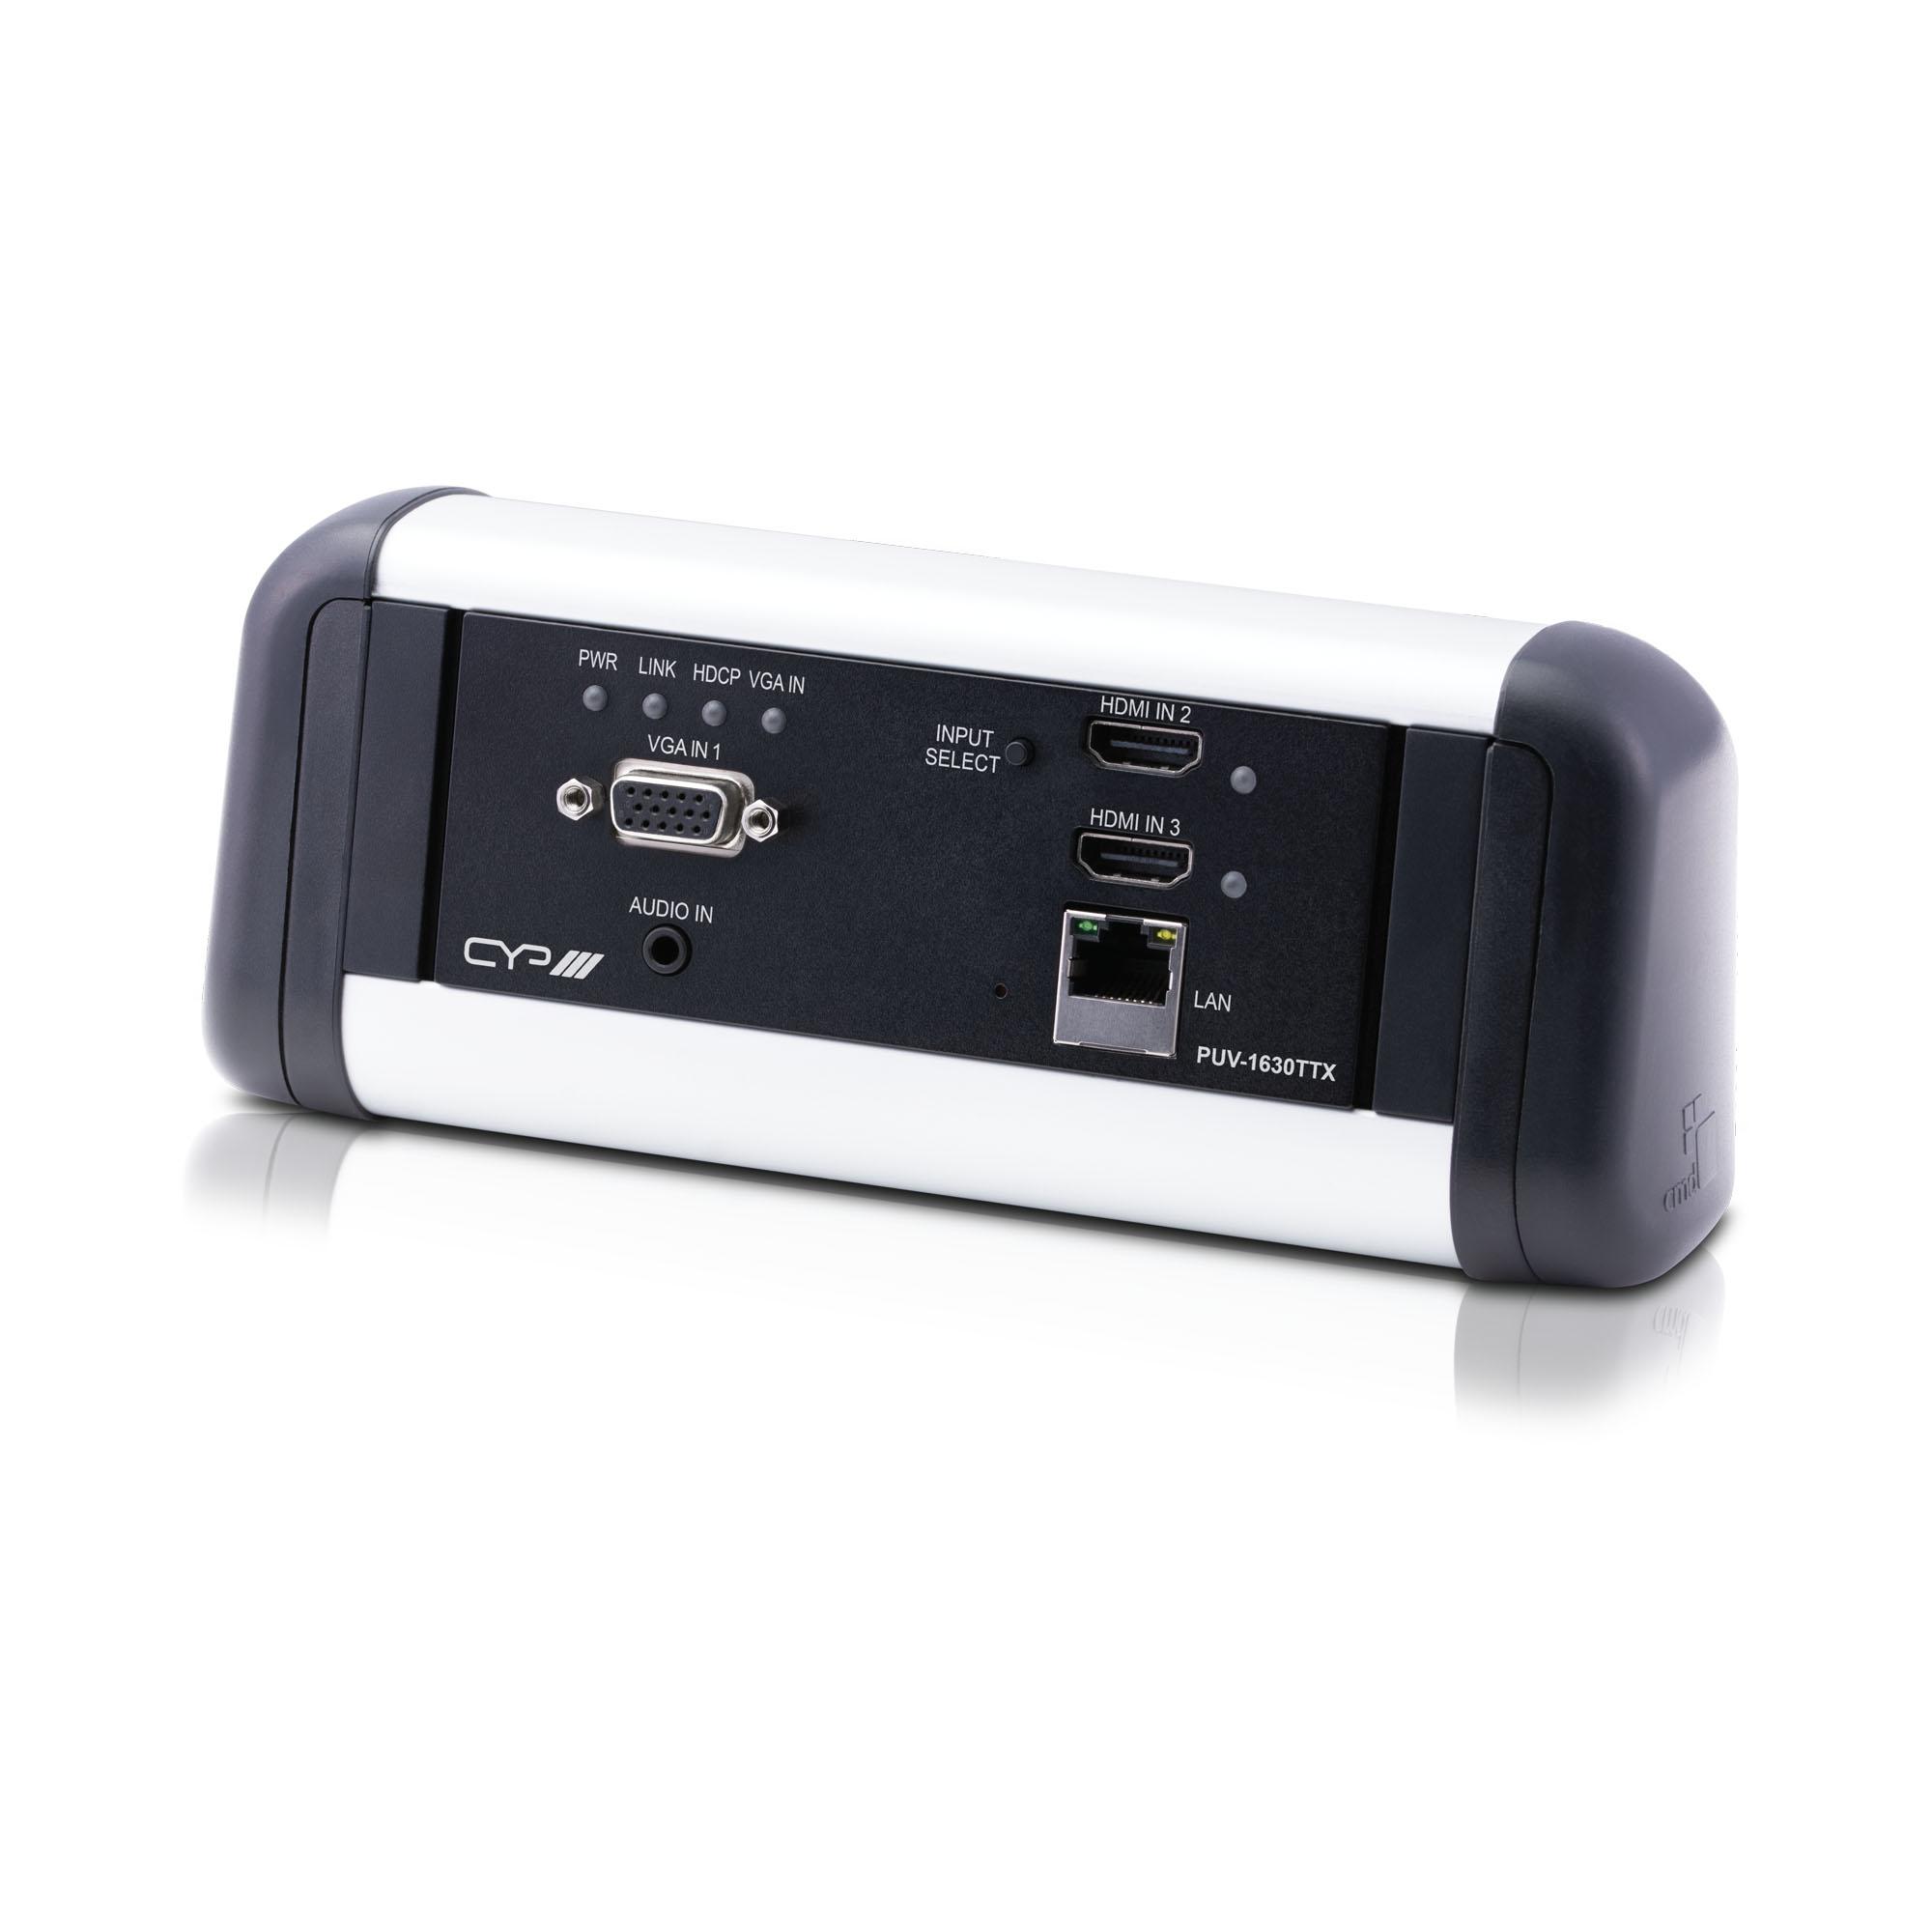 PUV-1630TTX HDBaseT Table-Top Transmitter with 2 x HDMI Inputs, 1 x VGA Input & Auto Conversion. In collaboration with CMD